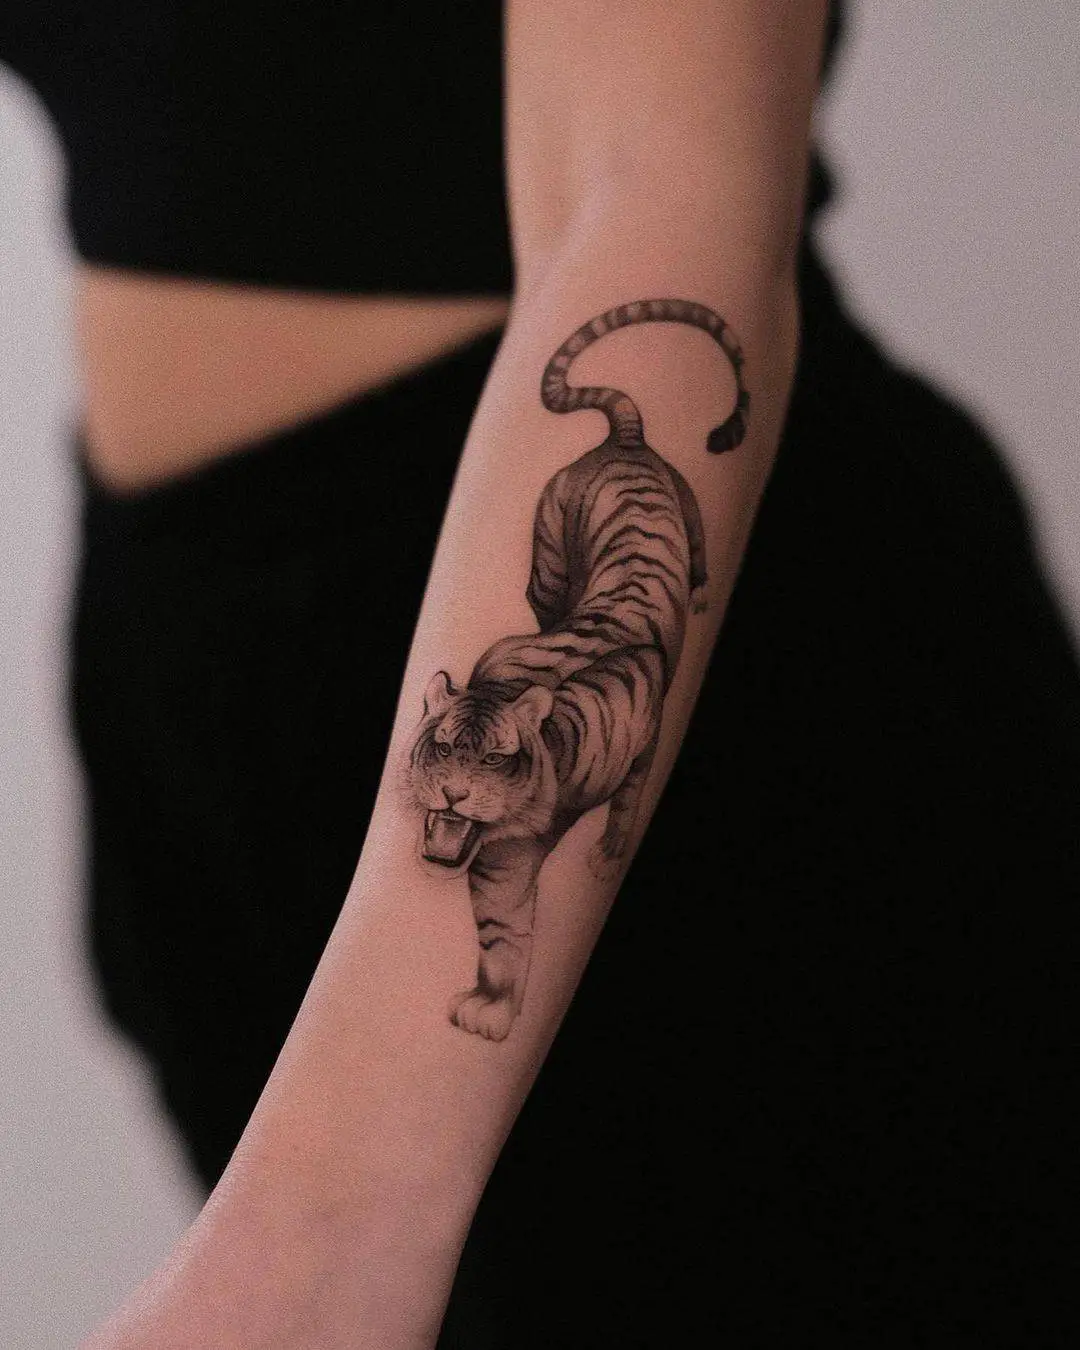 Amazing black and gray tiger on lower arm by ego.romantic